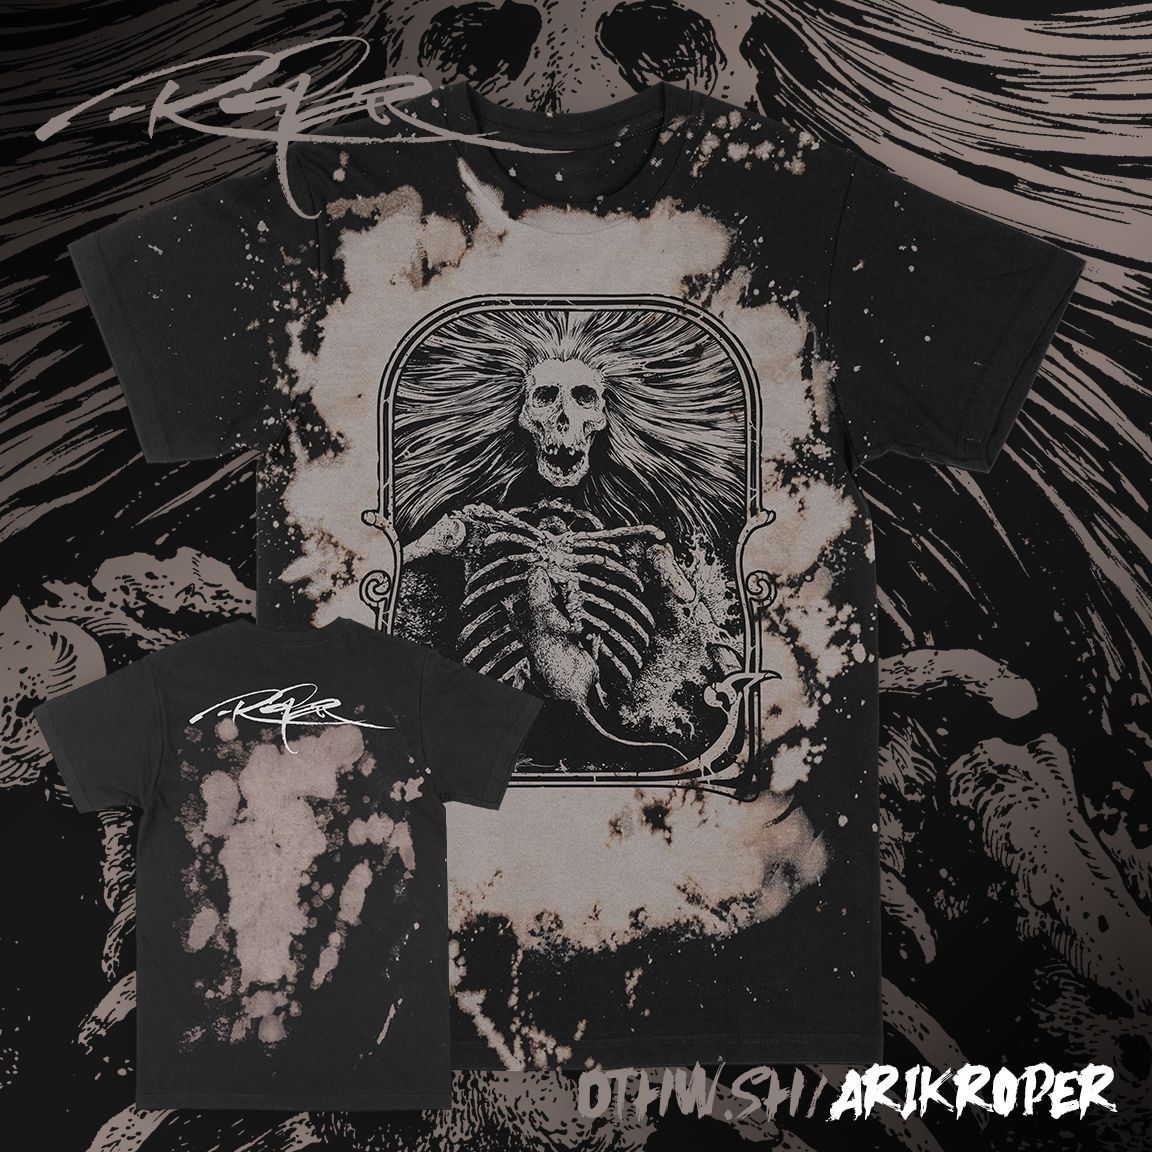 Arik Roper x Deathwish Store Apparel & Prints available now ➔ dthw.sh/arikroper Arik Moonhawk Roper is known for creating art for bands such as Sleep, High on Fire, Earth, Kvelertak, Sunno))), Cathedral, Weedeater, Earthless, Windhand, etc. #ArikRoper #DeathwishInc